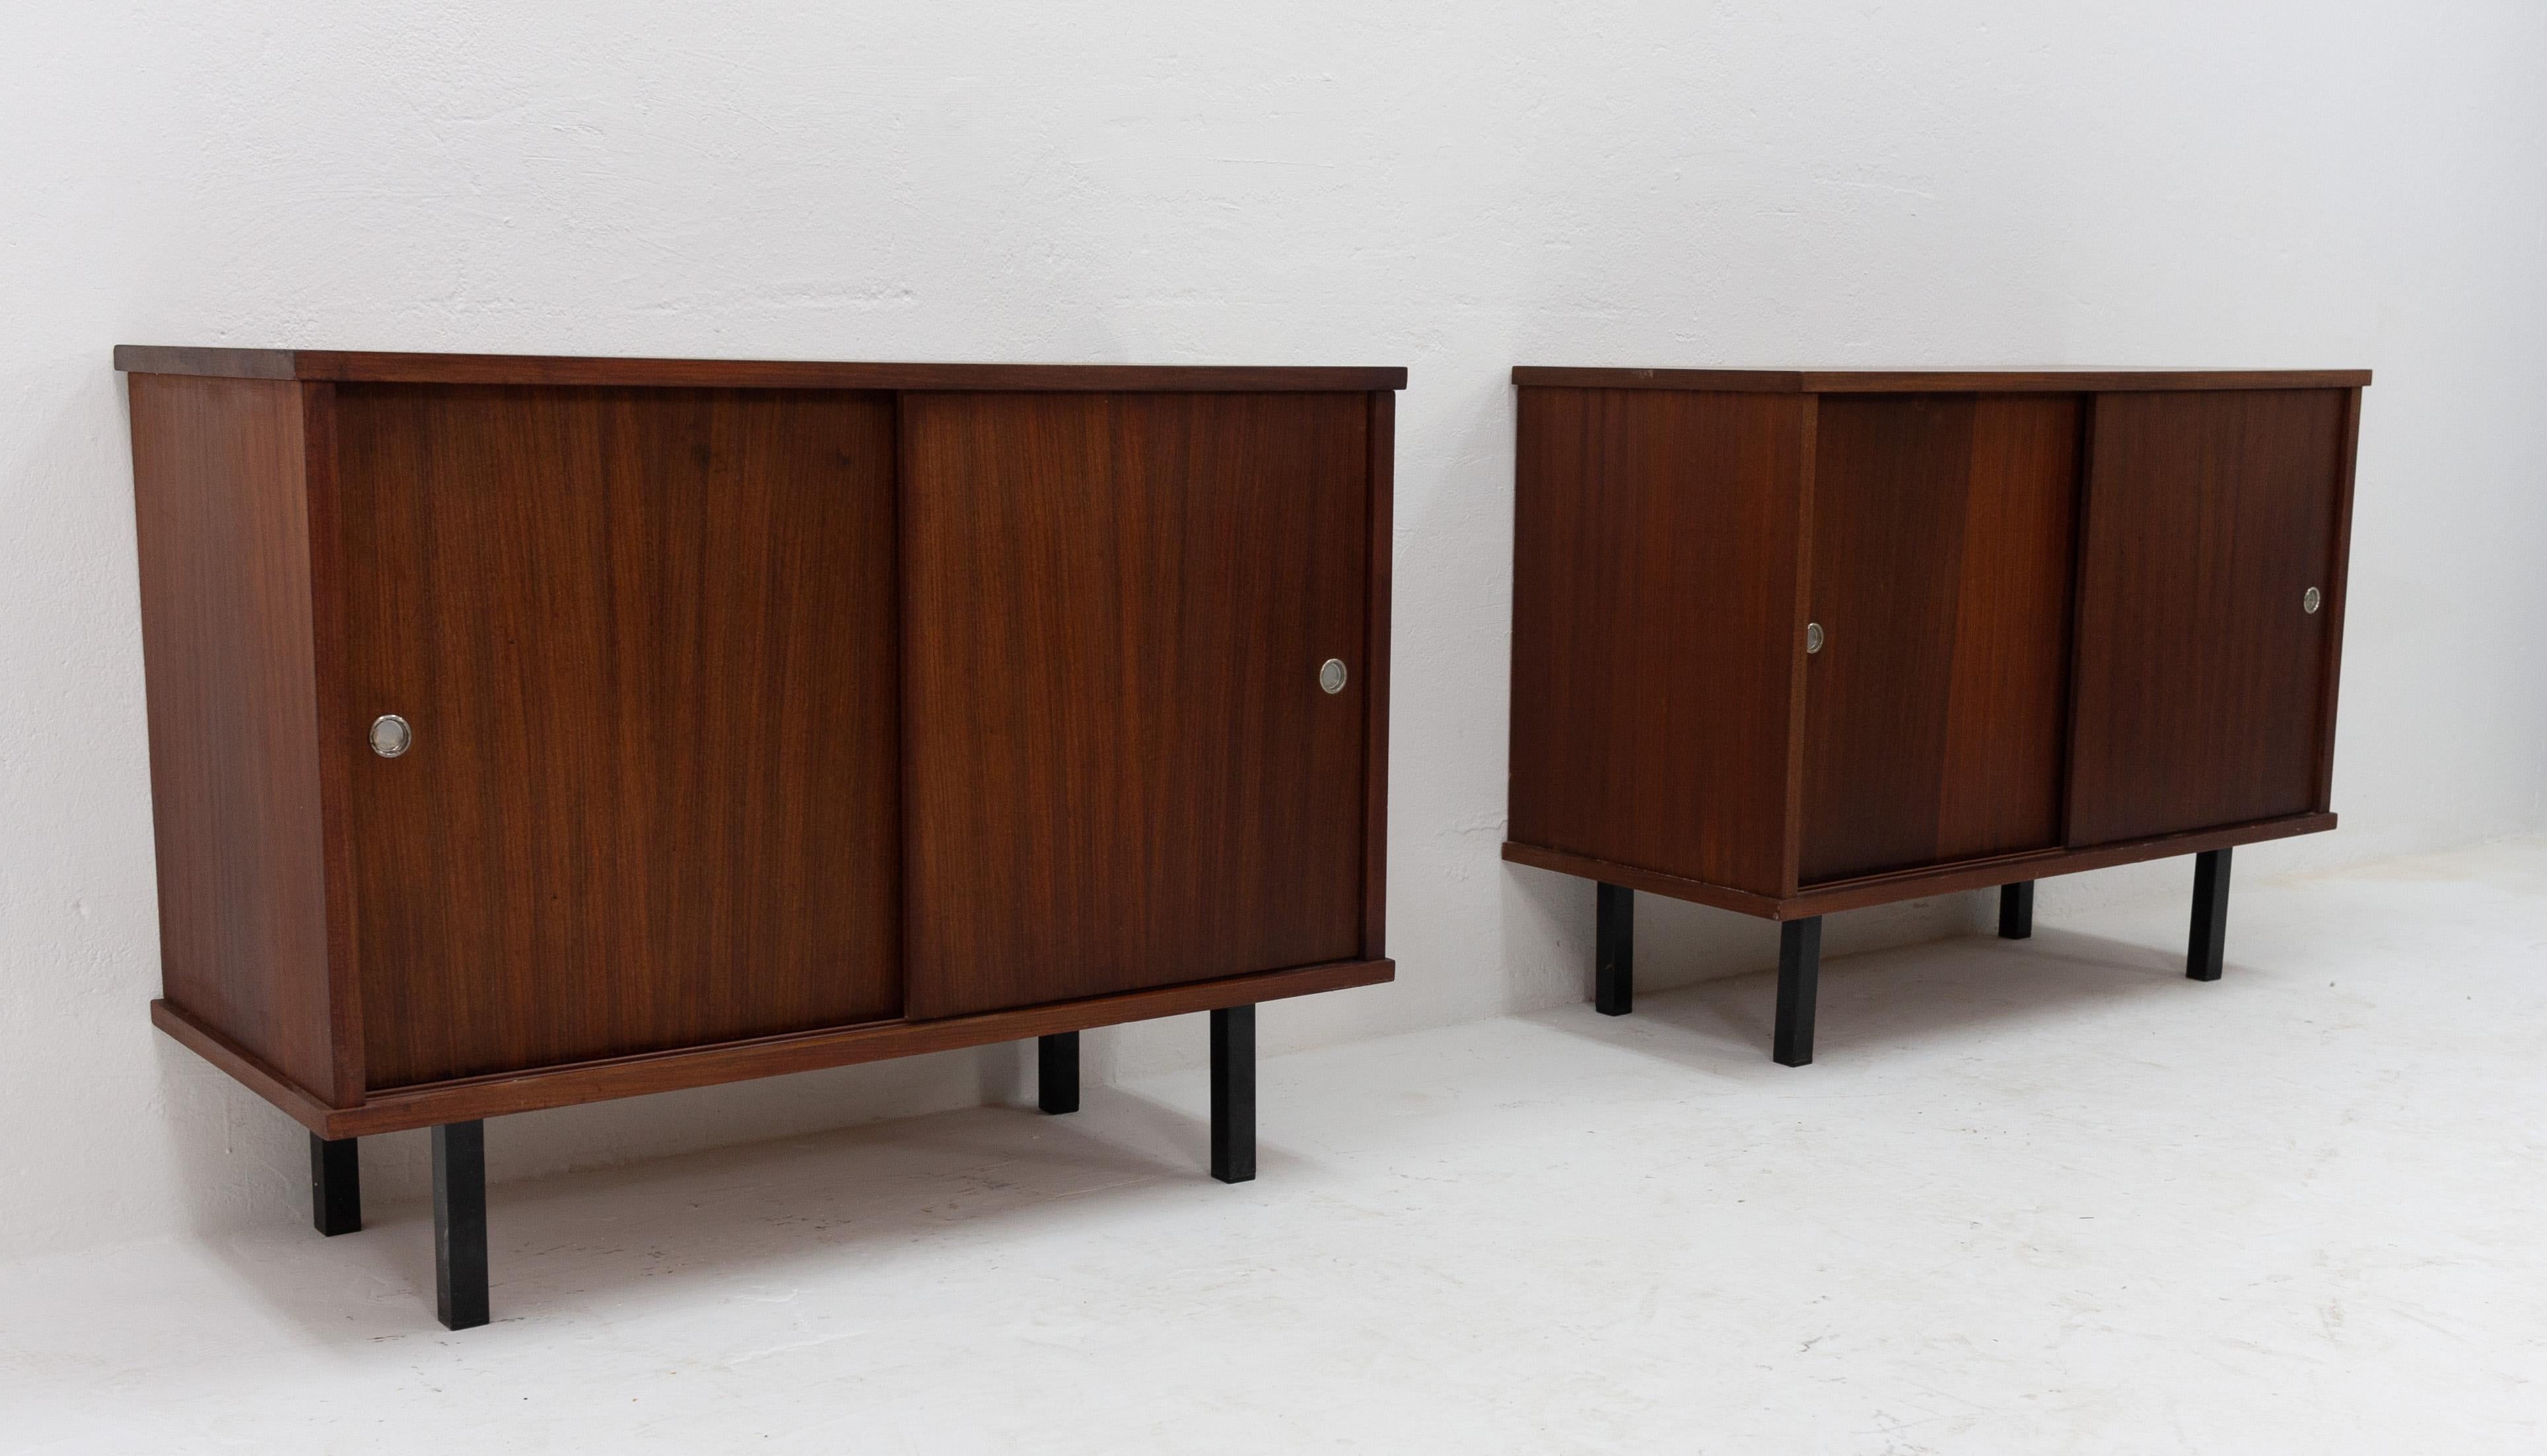 Two identical cabinets with sliding doors. Produced by Nissen Naarden in the Netherlands, 1960s. Nice understated design.